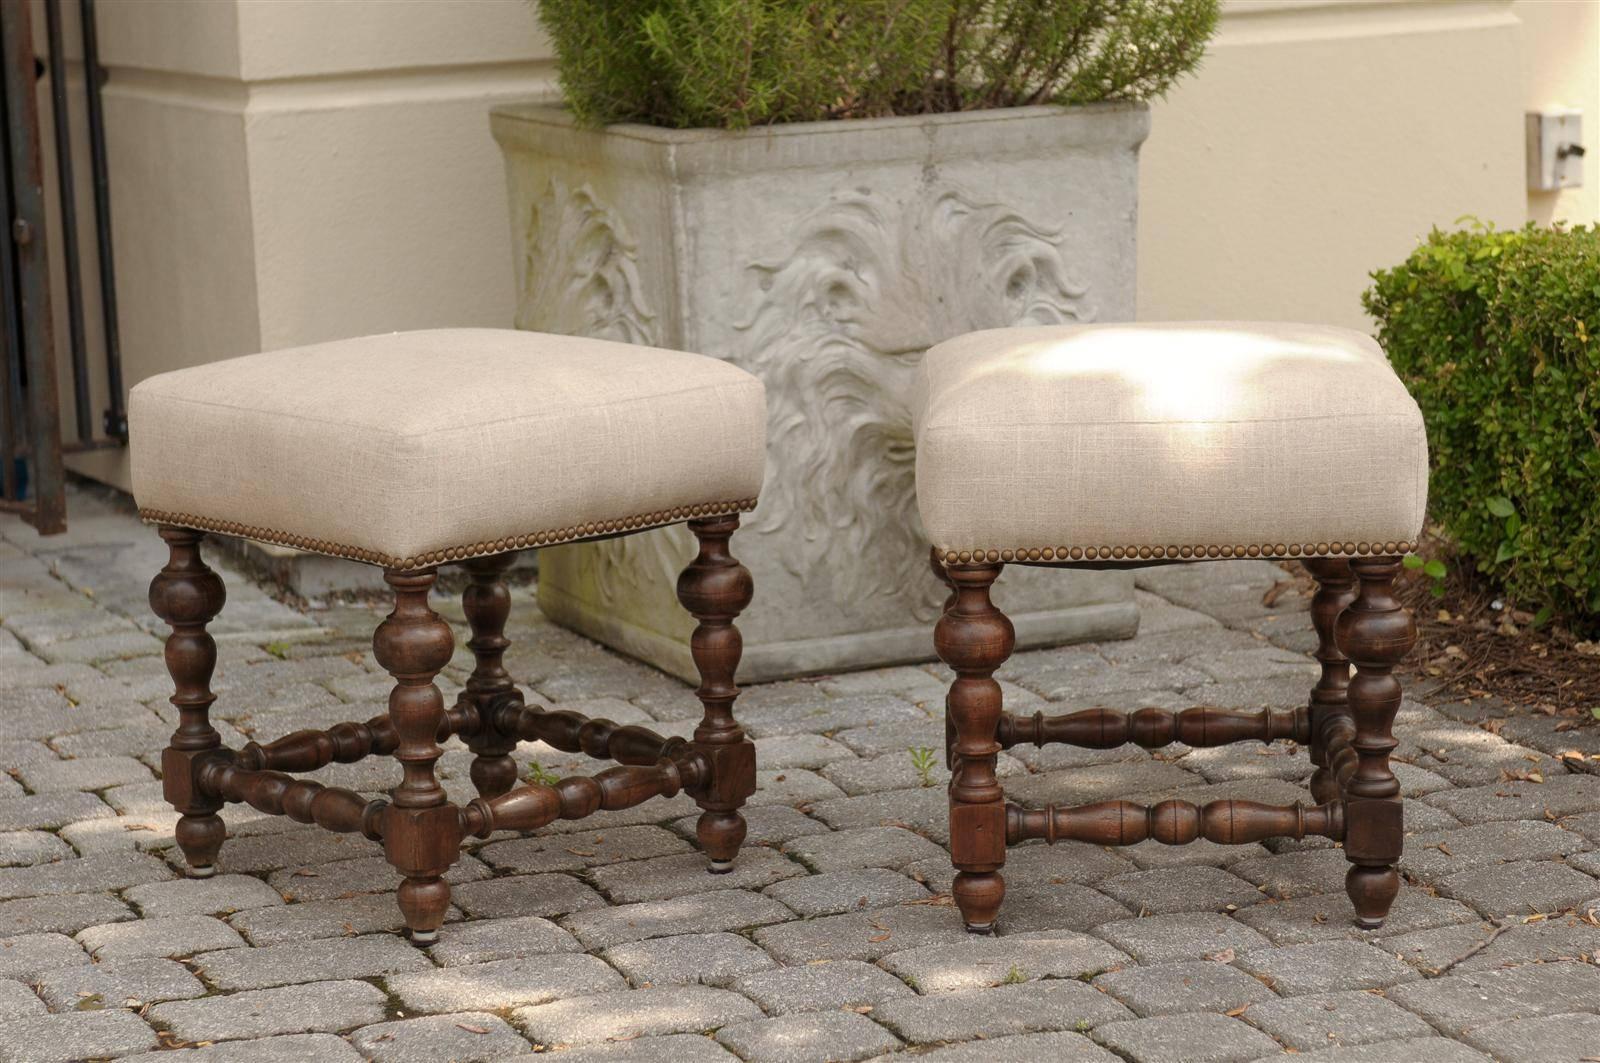 A pair of English walnut stools from the mid 19th century. Topped with square seats upholstered in muslin with nail head trims, each stool is raised on four beautifully wooden turned feet with block joints connected to one another with turned